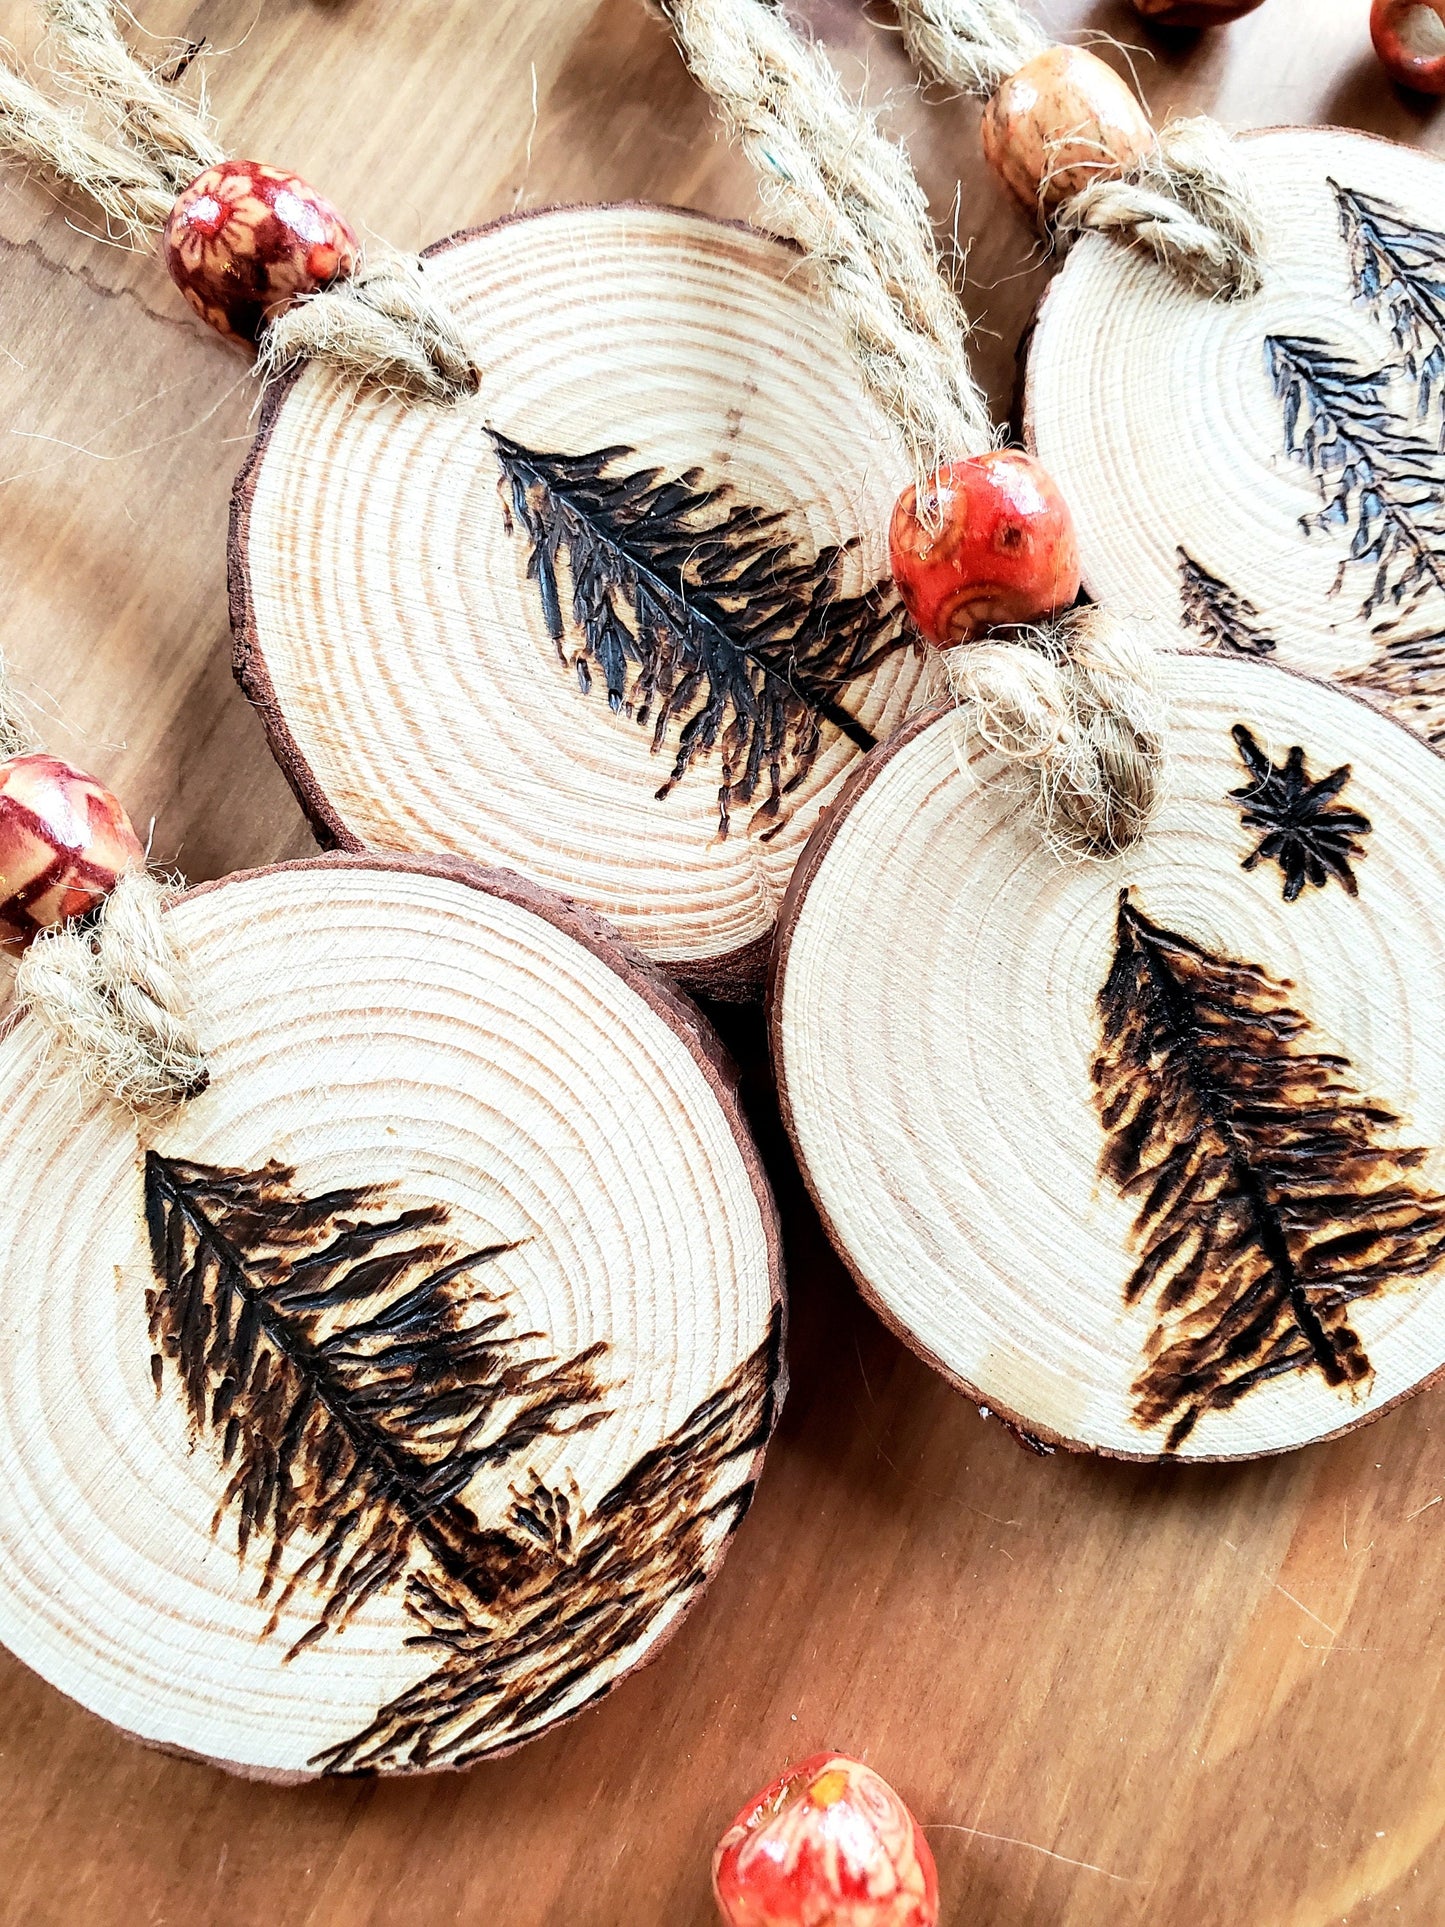 Unique Handcrafted Wood Burned Ornaments - Multi-Pack - Perfect for Christmas Decorations